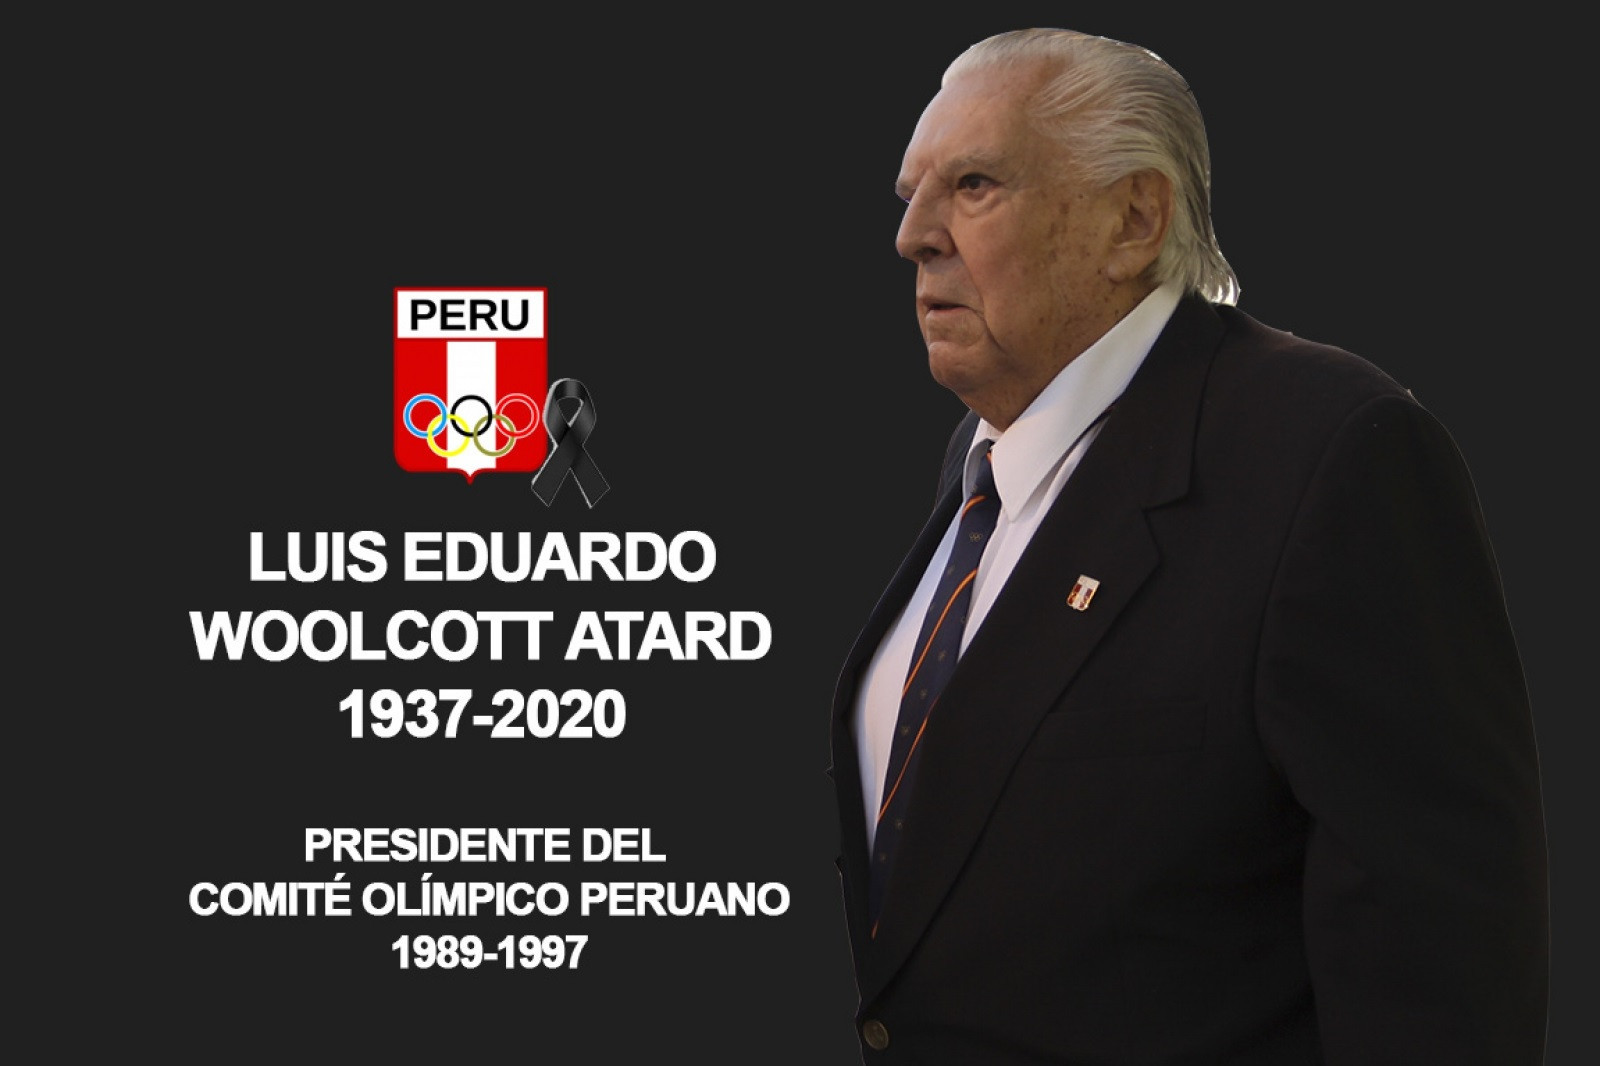 Peru NOC pays tribute to former President considered "one of the great promoters"